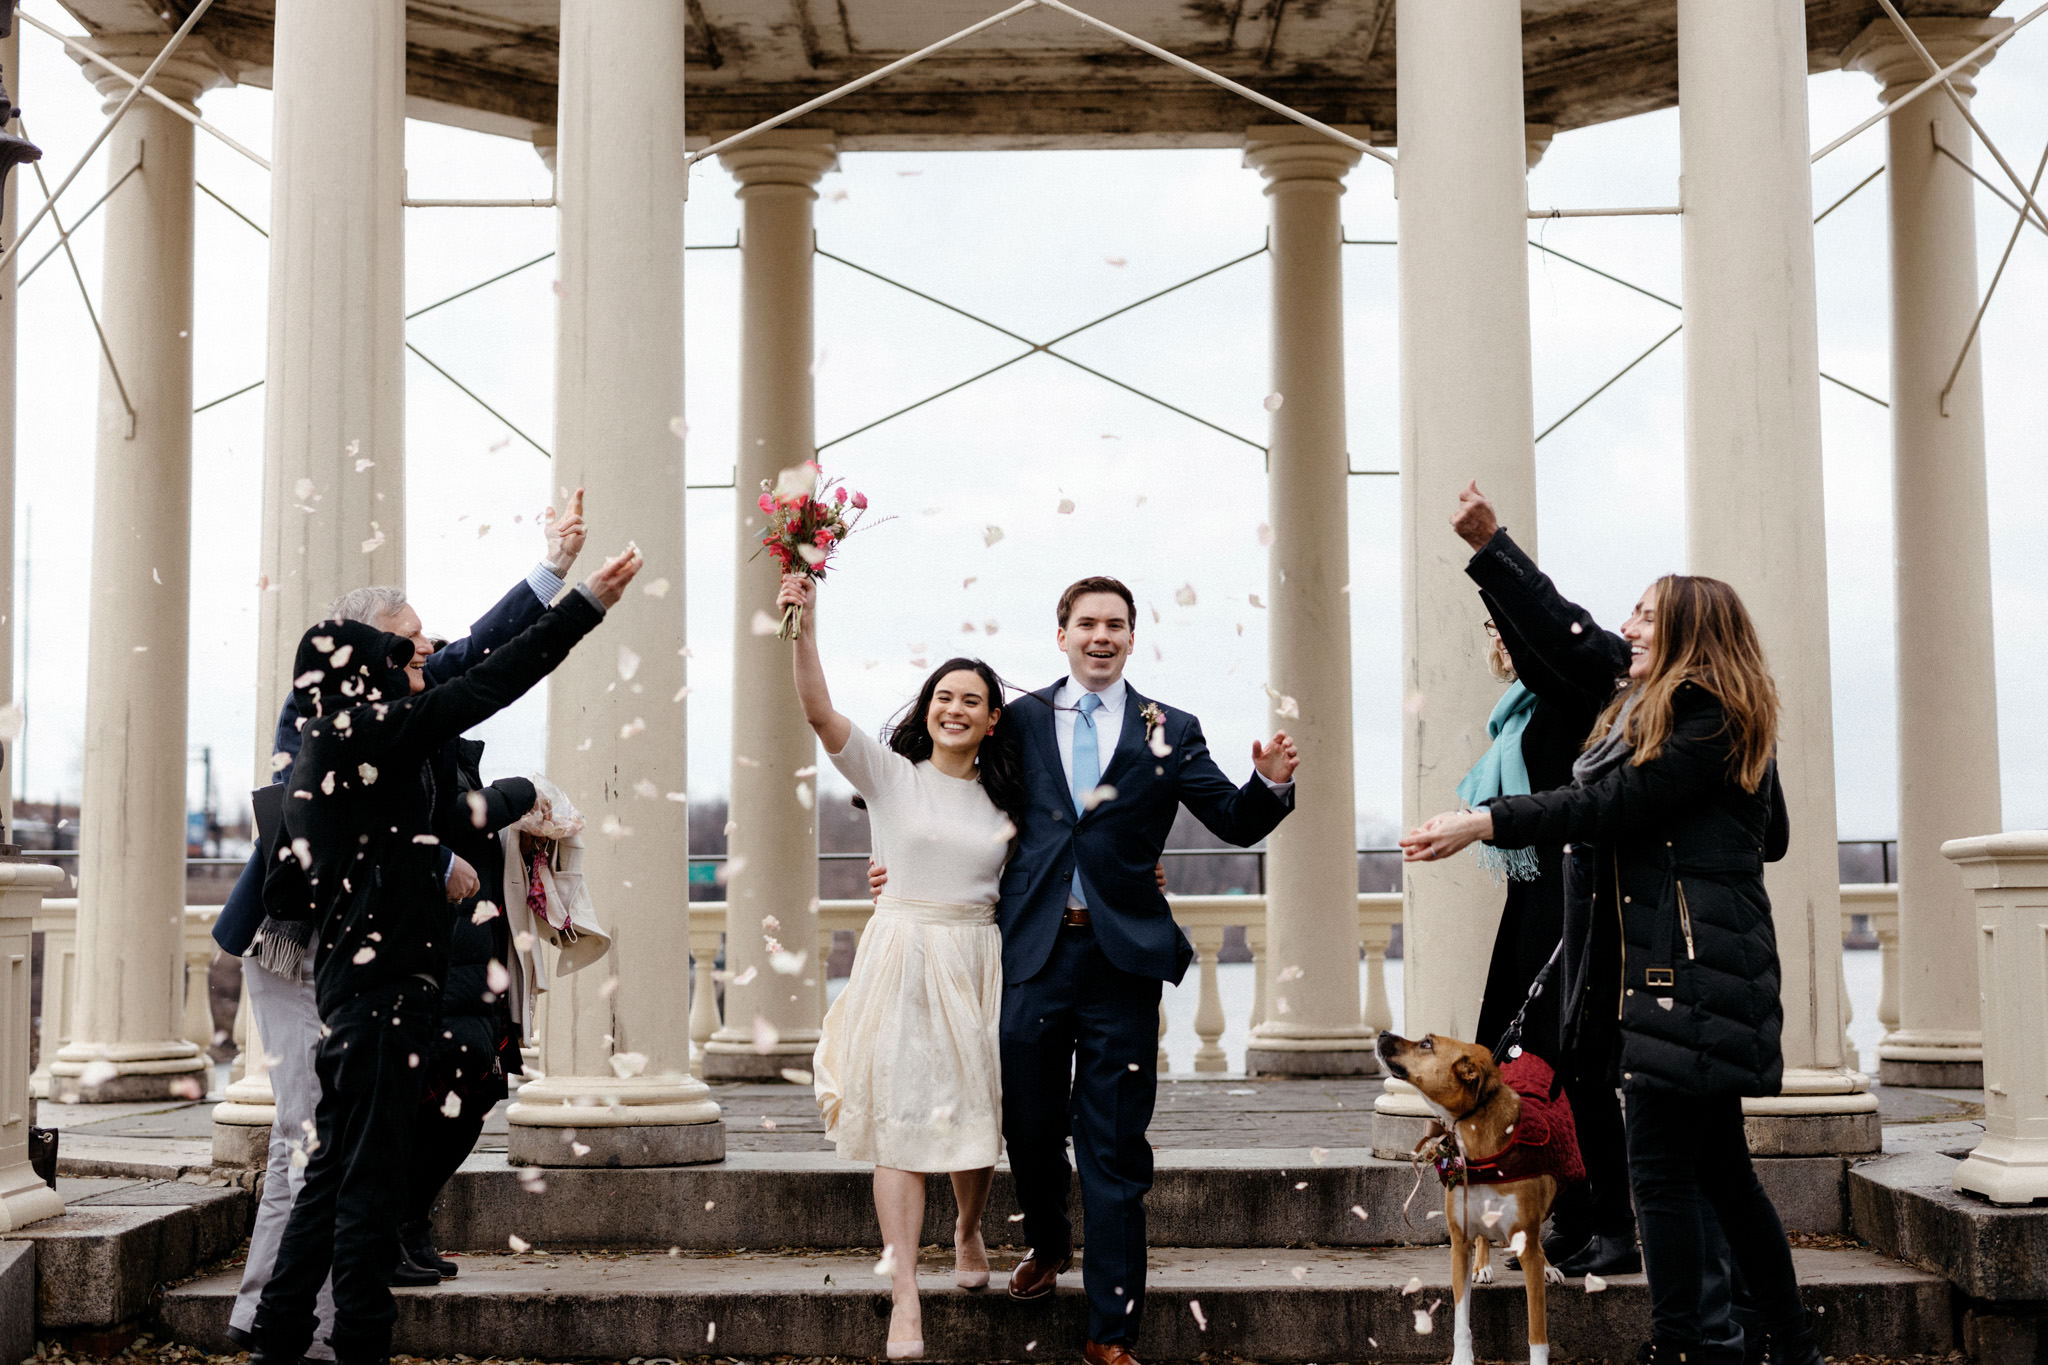 The bride and groom walk on the isle as the guests shower them with flower petals. Winter wedding venues image by Jenny Fu Studio